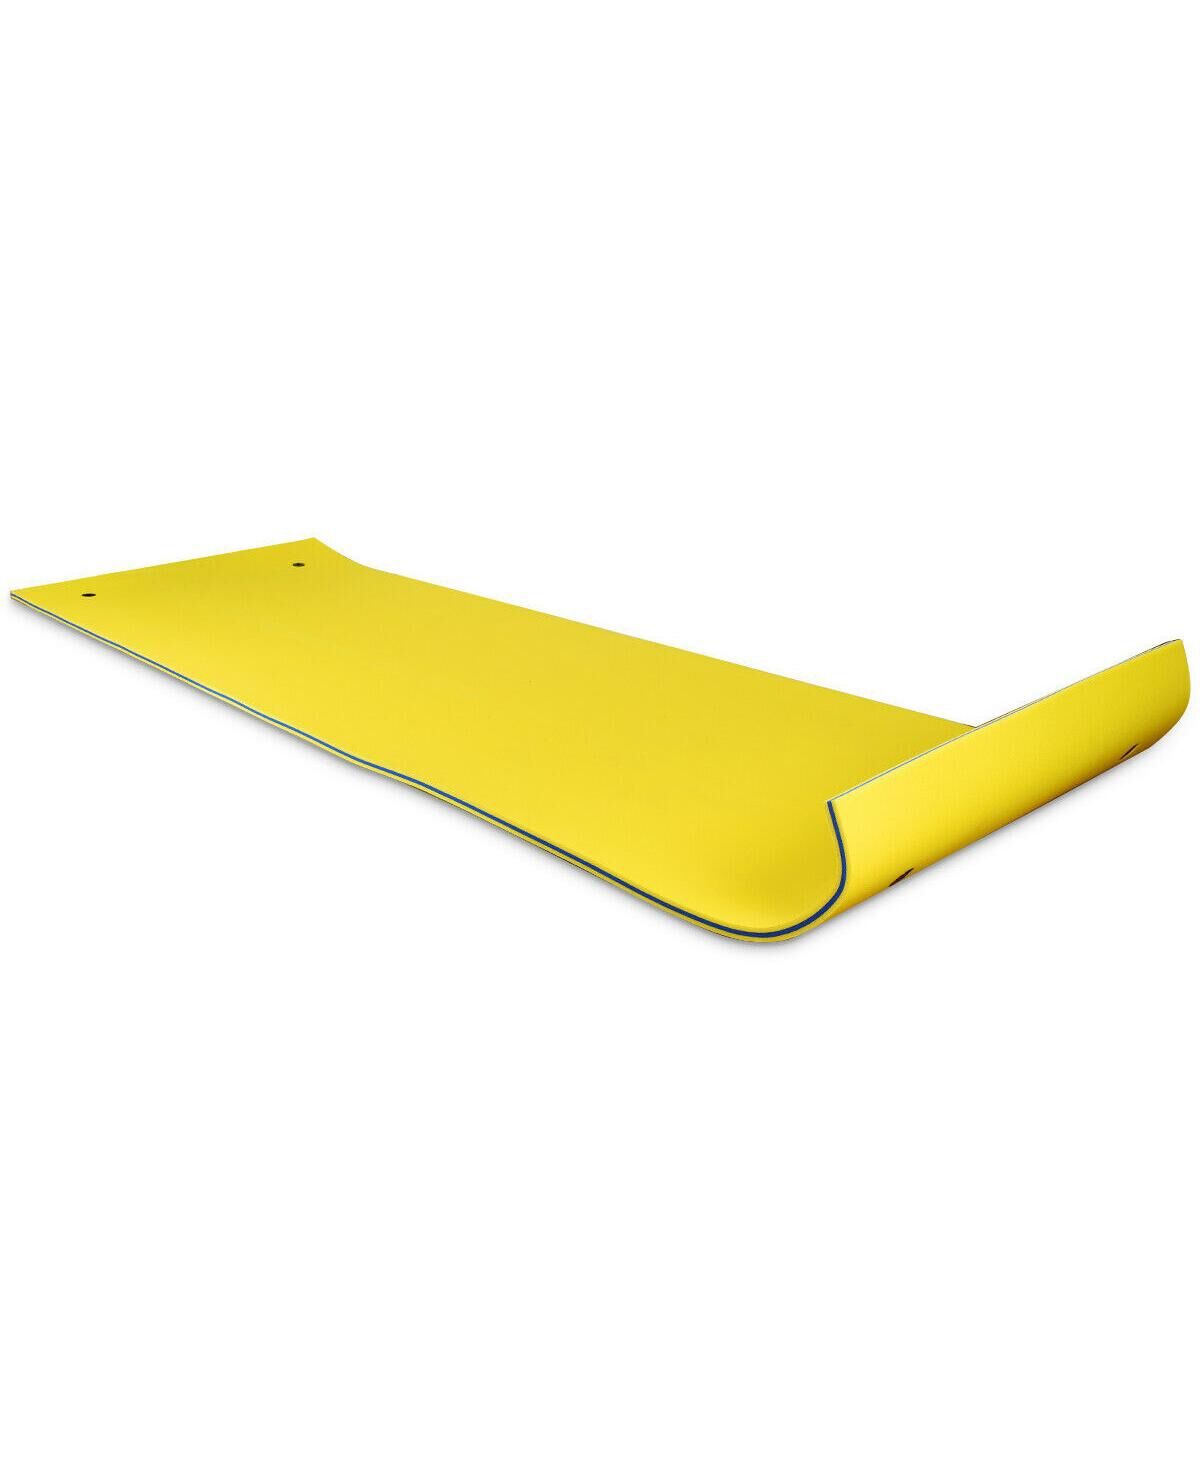 Costway 3 Layer Floating Water Pad Foam Mat Water Recreation Relaxing Tear-resistant 18' x 6' - Yellow